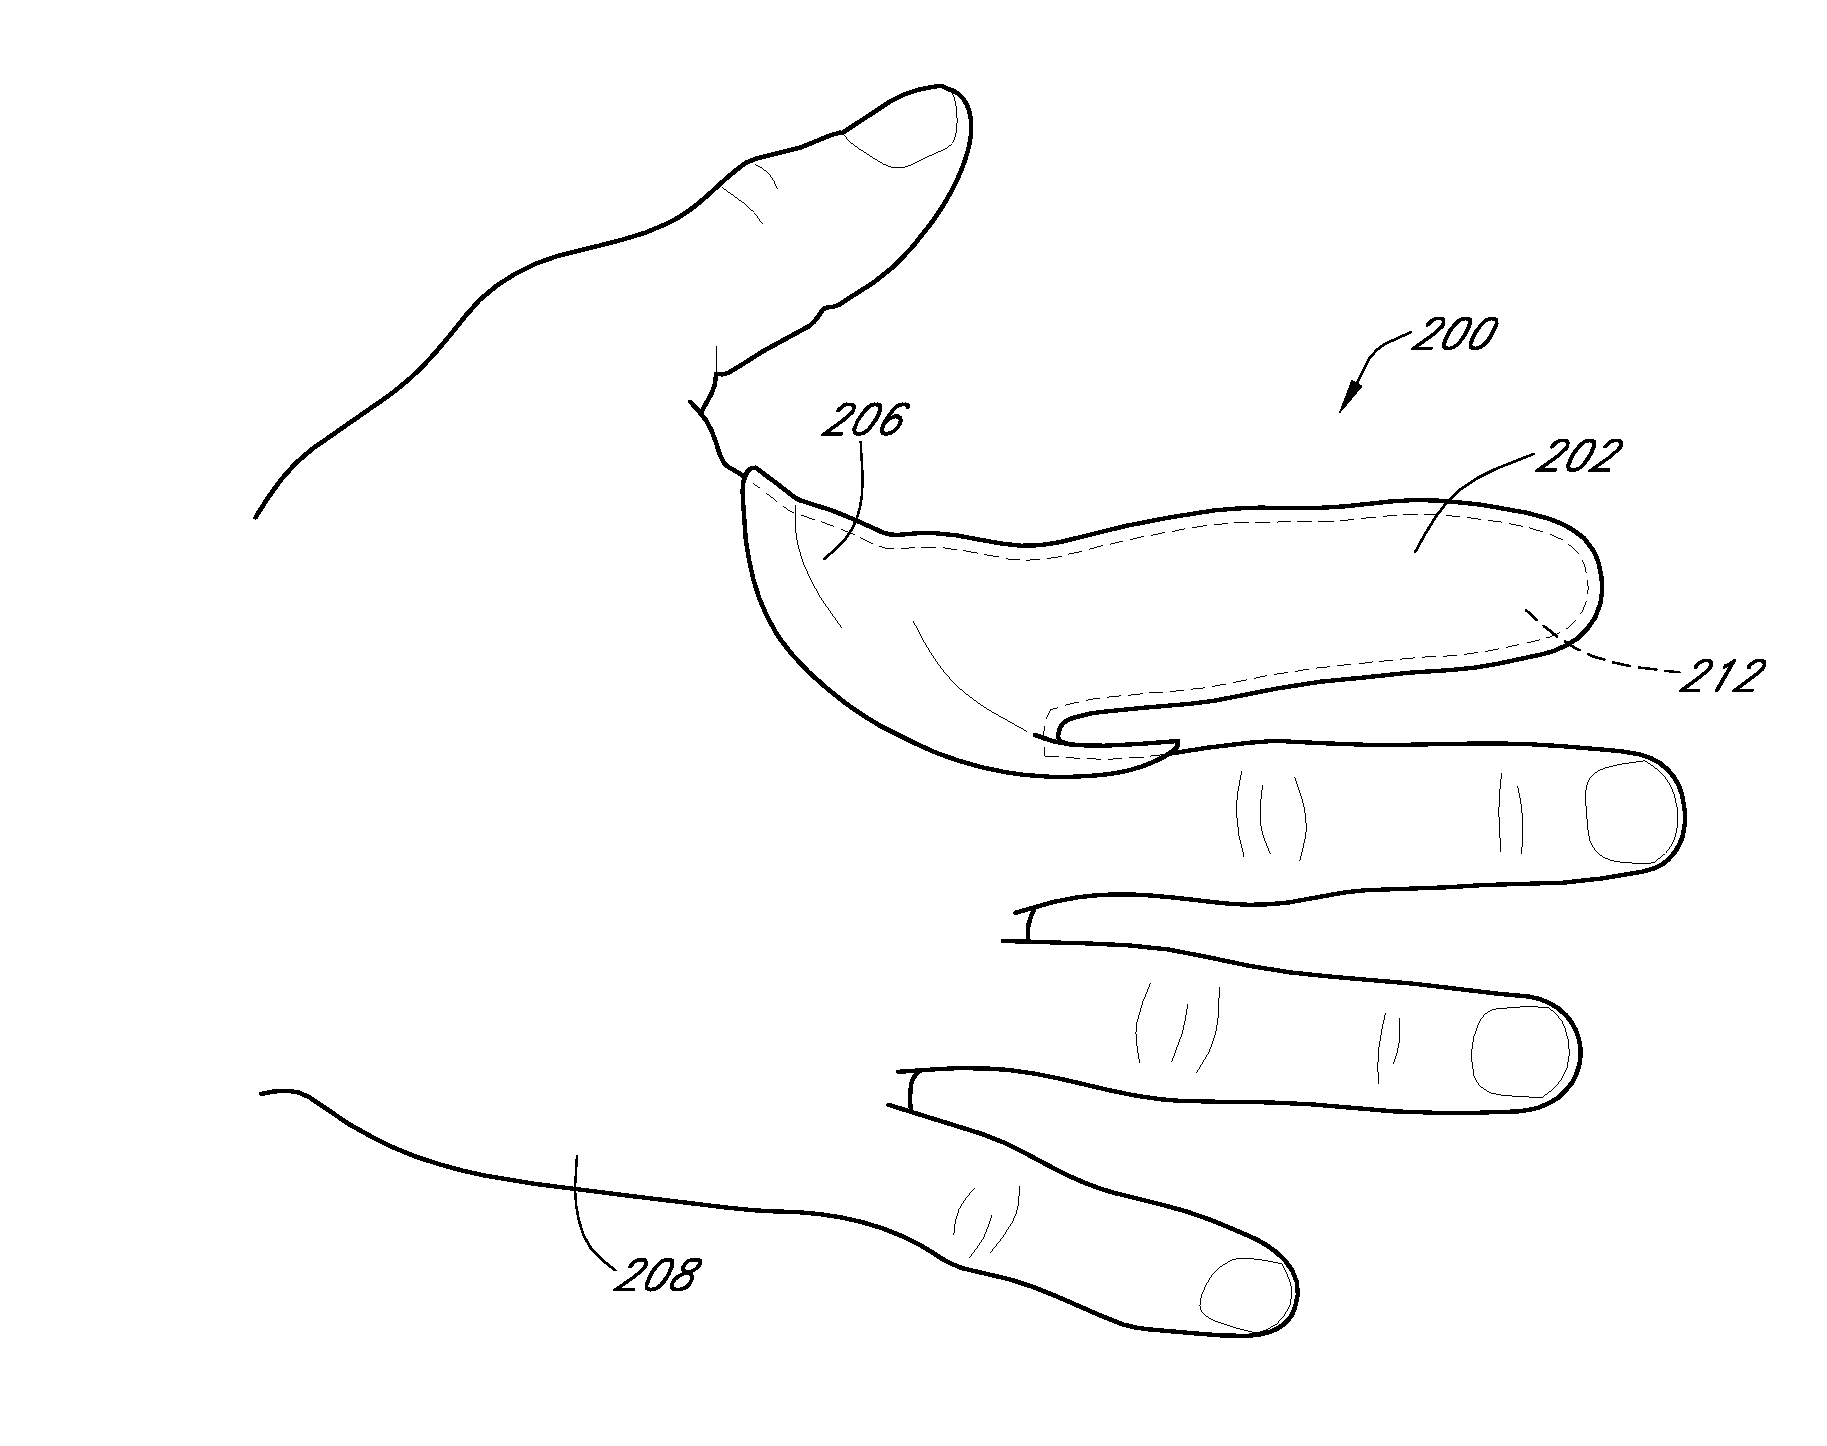 Single finger and dual finger medication delivery devices, systems and kits; and methods of using the same